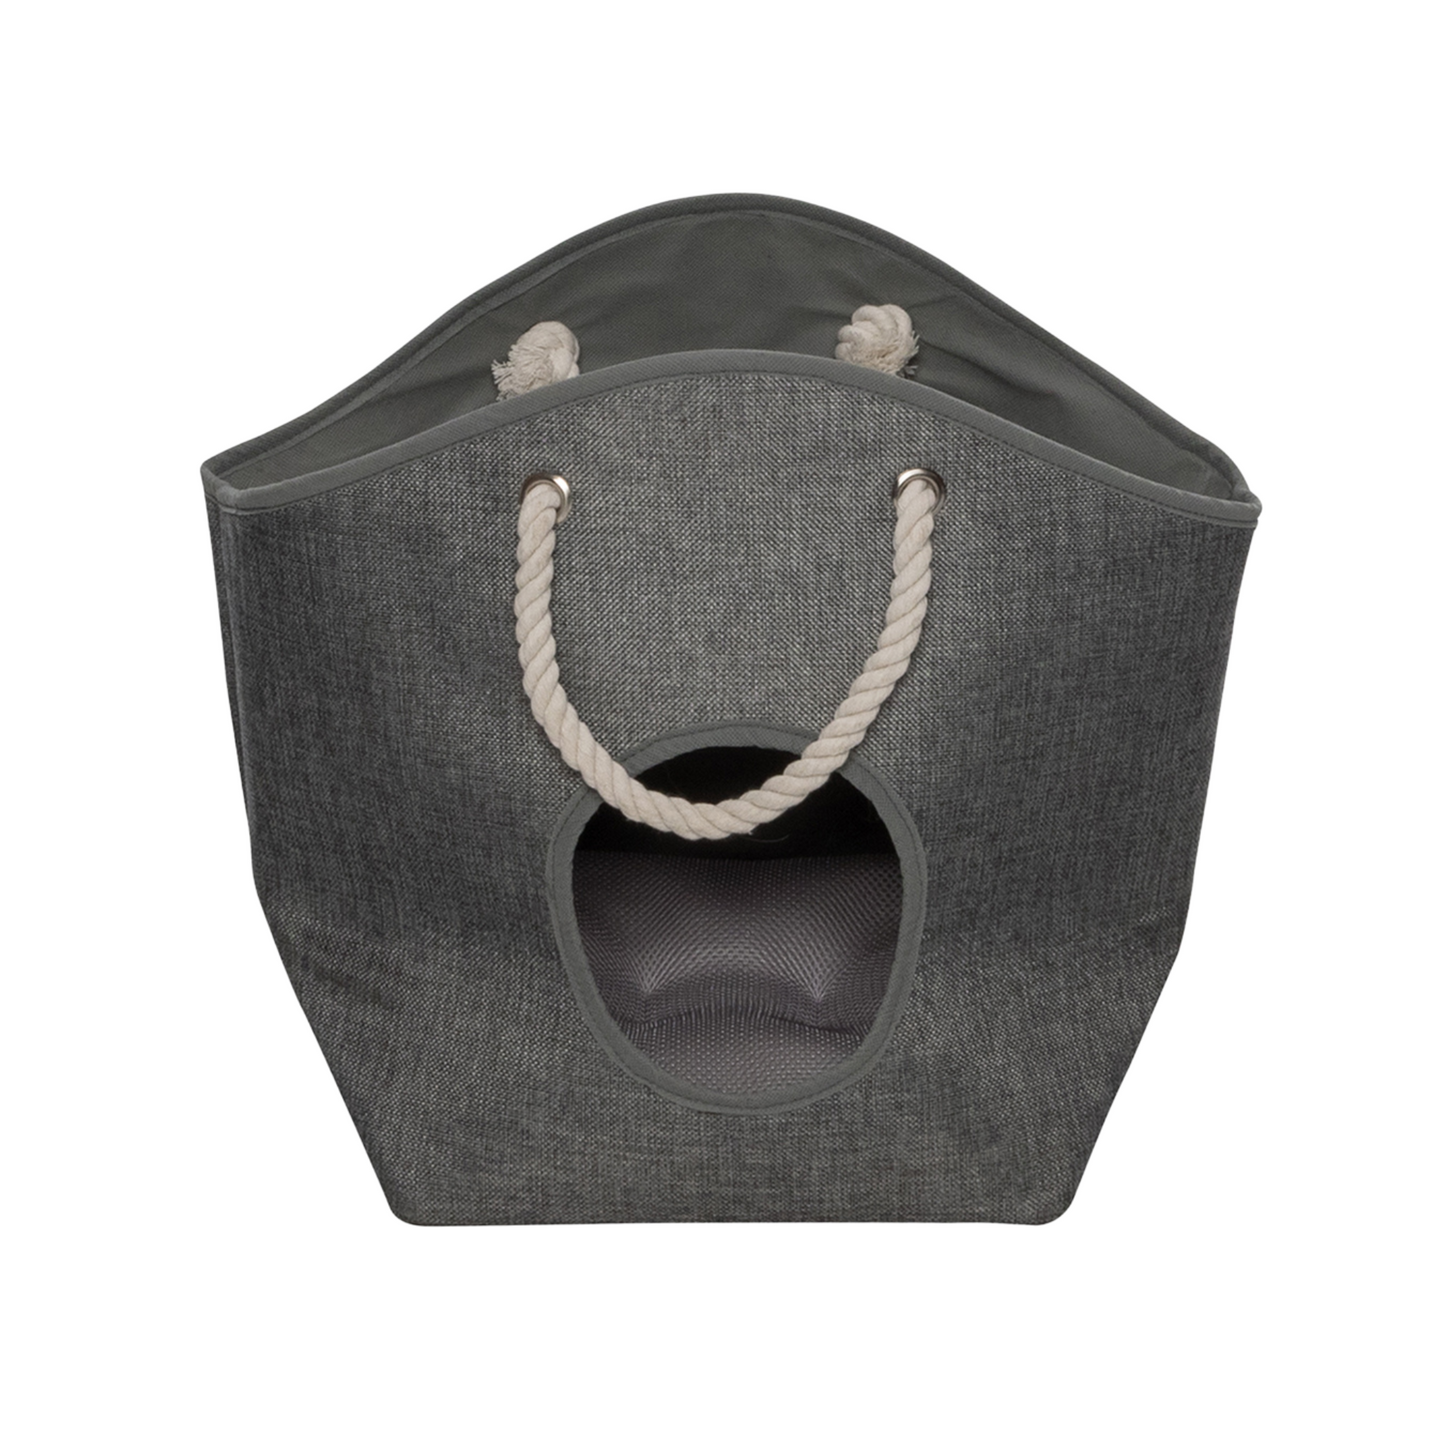 HOMECOLLECTION PET-CAVE LAUNDRY BAG